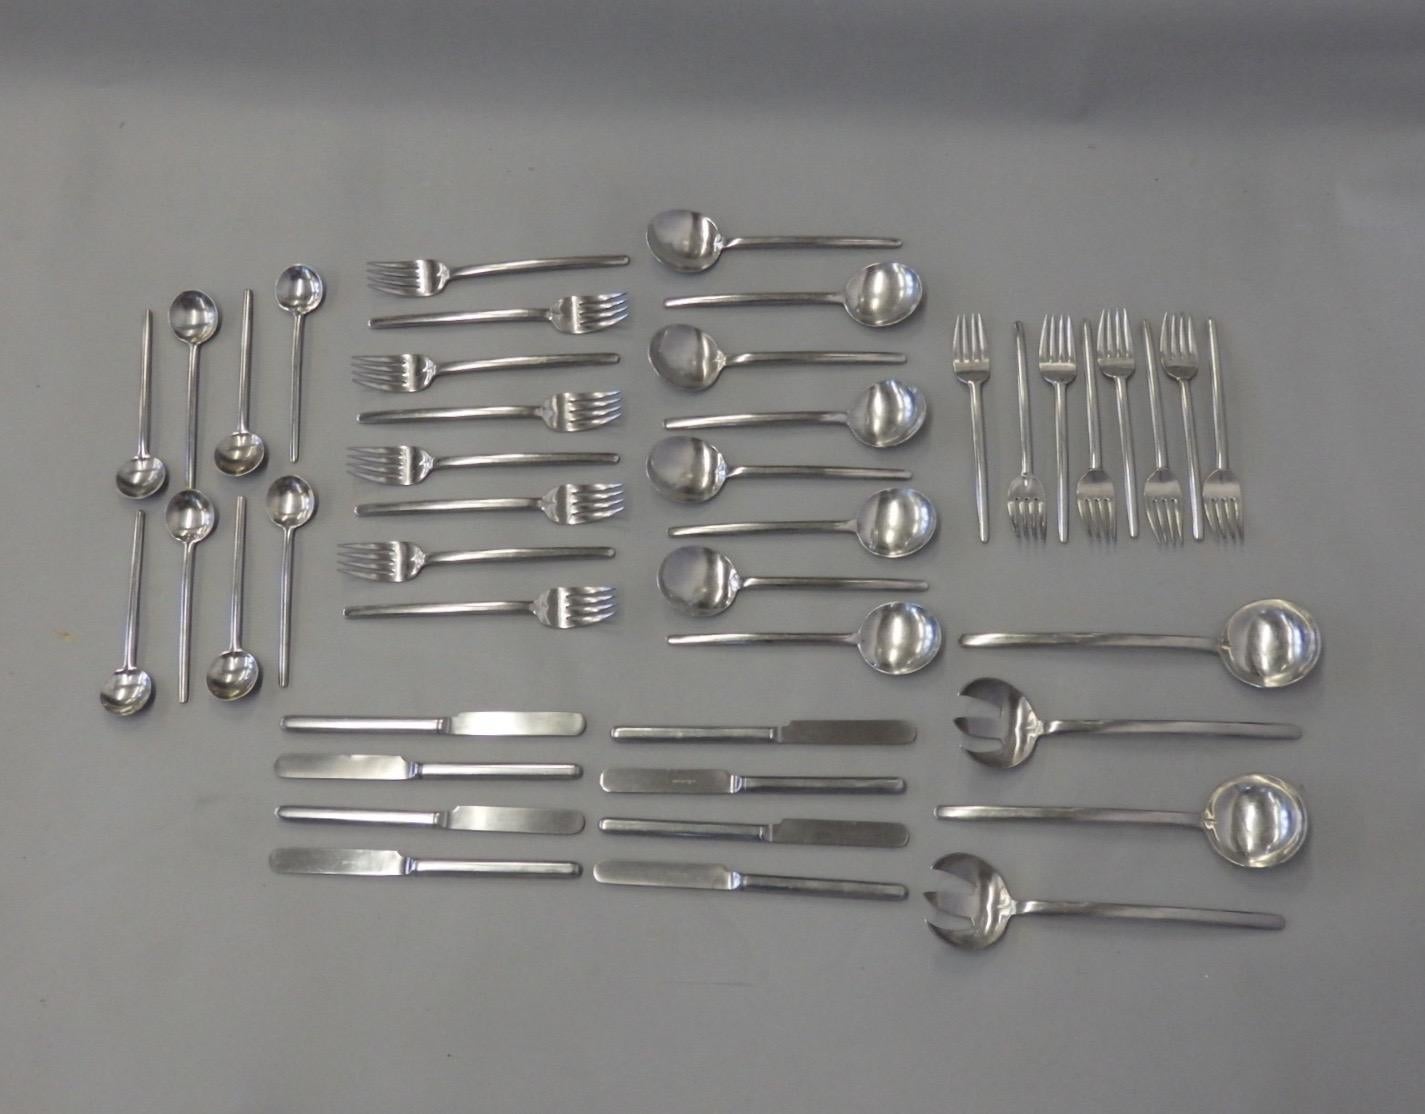 Marked Lauffer Holland 18/8 which denotes 18% chromium 8% nickel. The set is in good vintage condition . It has been used. Eight place settings of five pieces with four serving pieces 44 piece total.